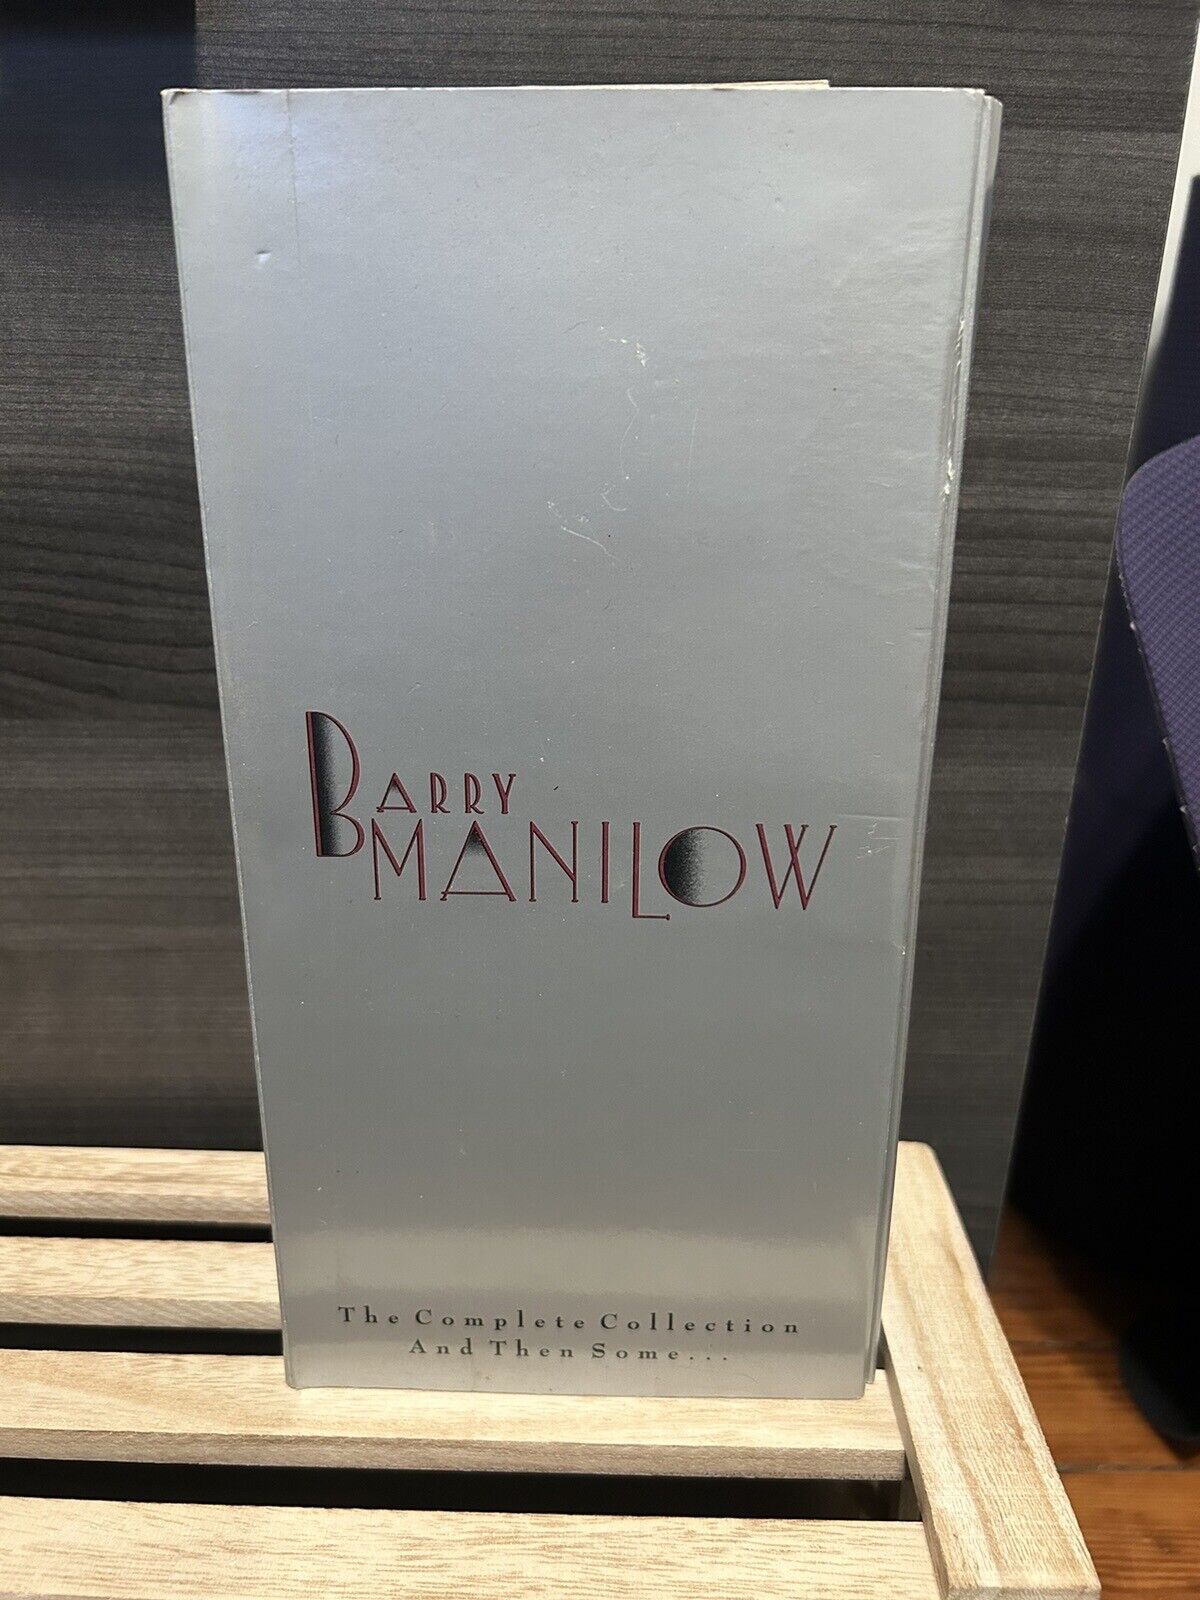 Barry Manilow - The Complete Collection And Then Some... (CD) Set With Book VHS